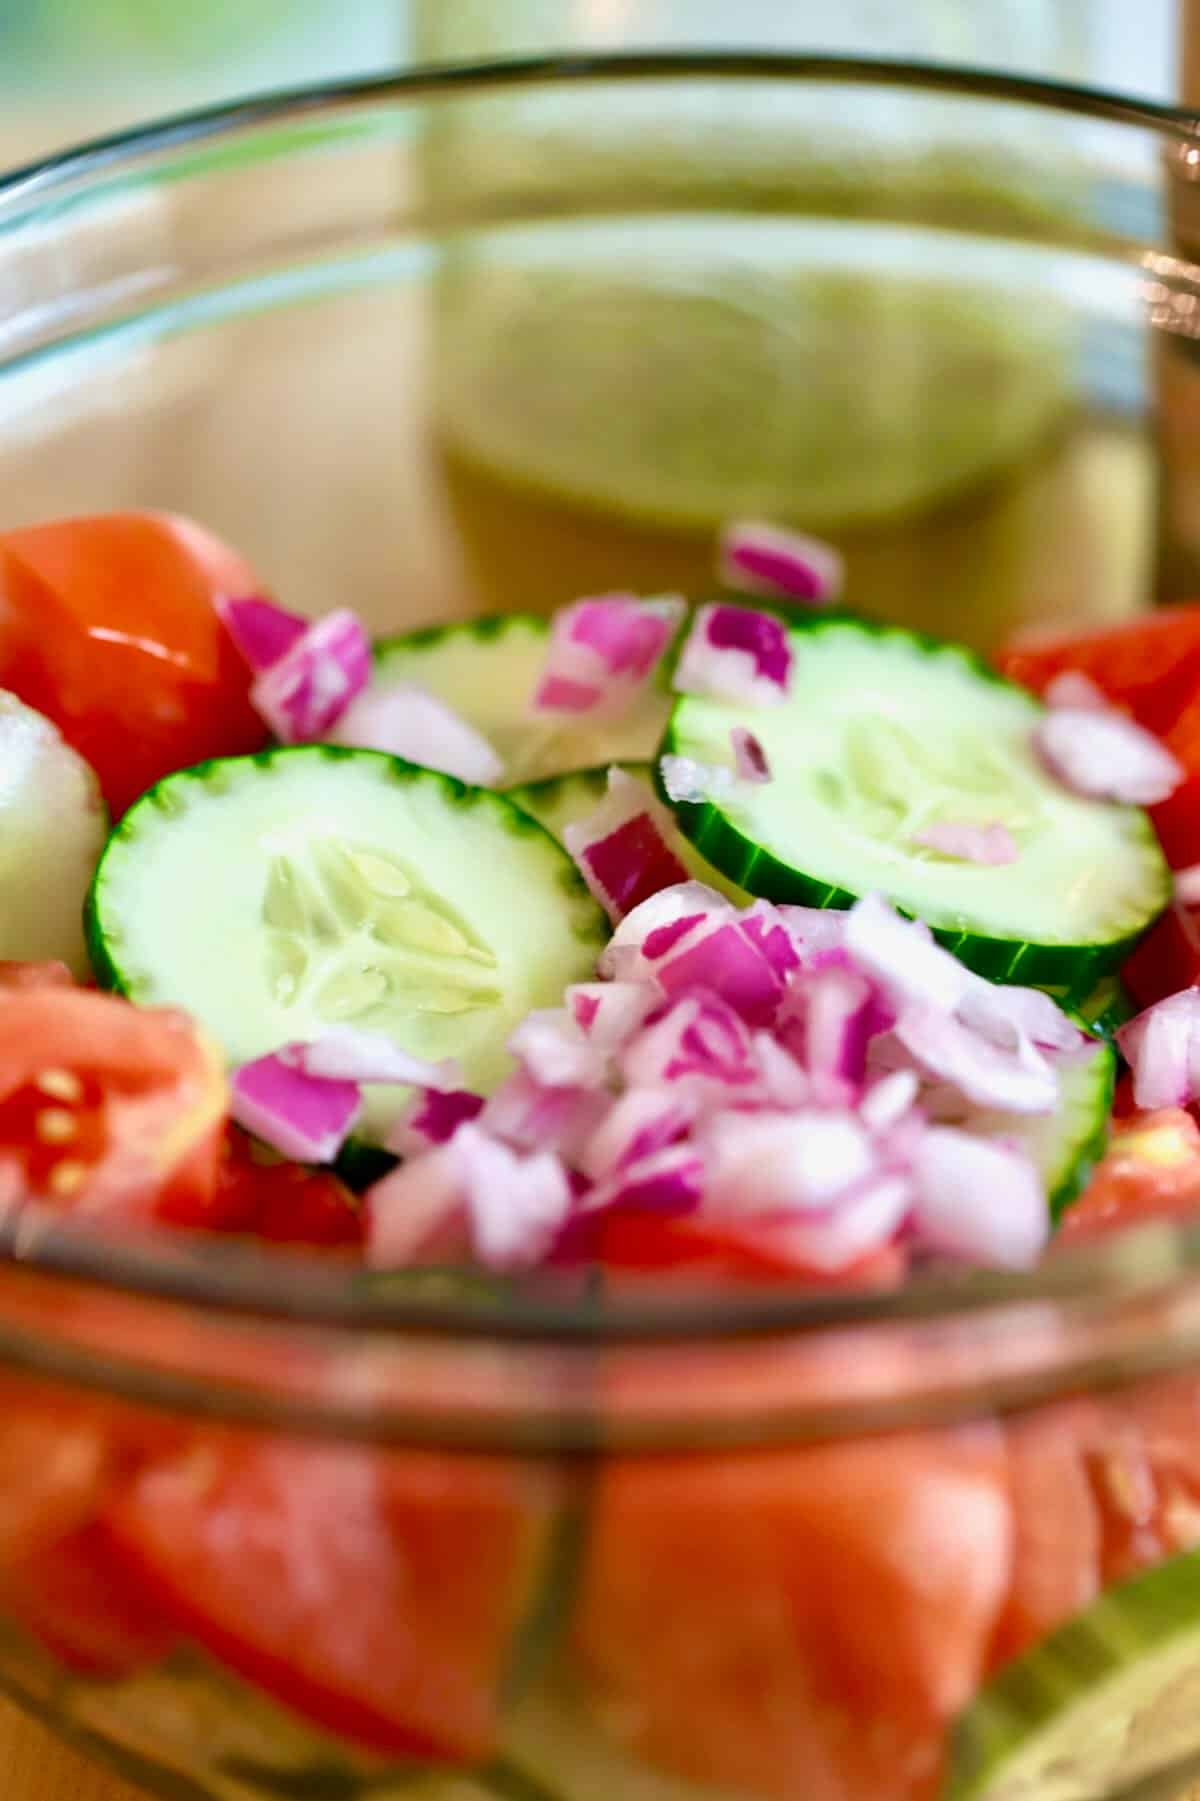 Sliced cucumbers, tomatoes and diced red onion in a glass bowl.